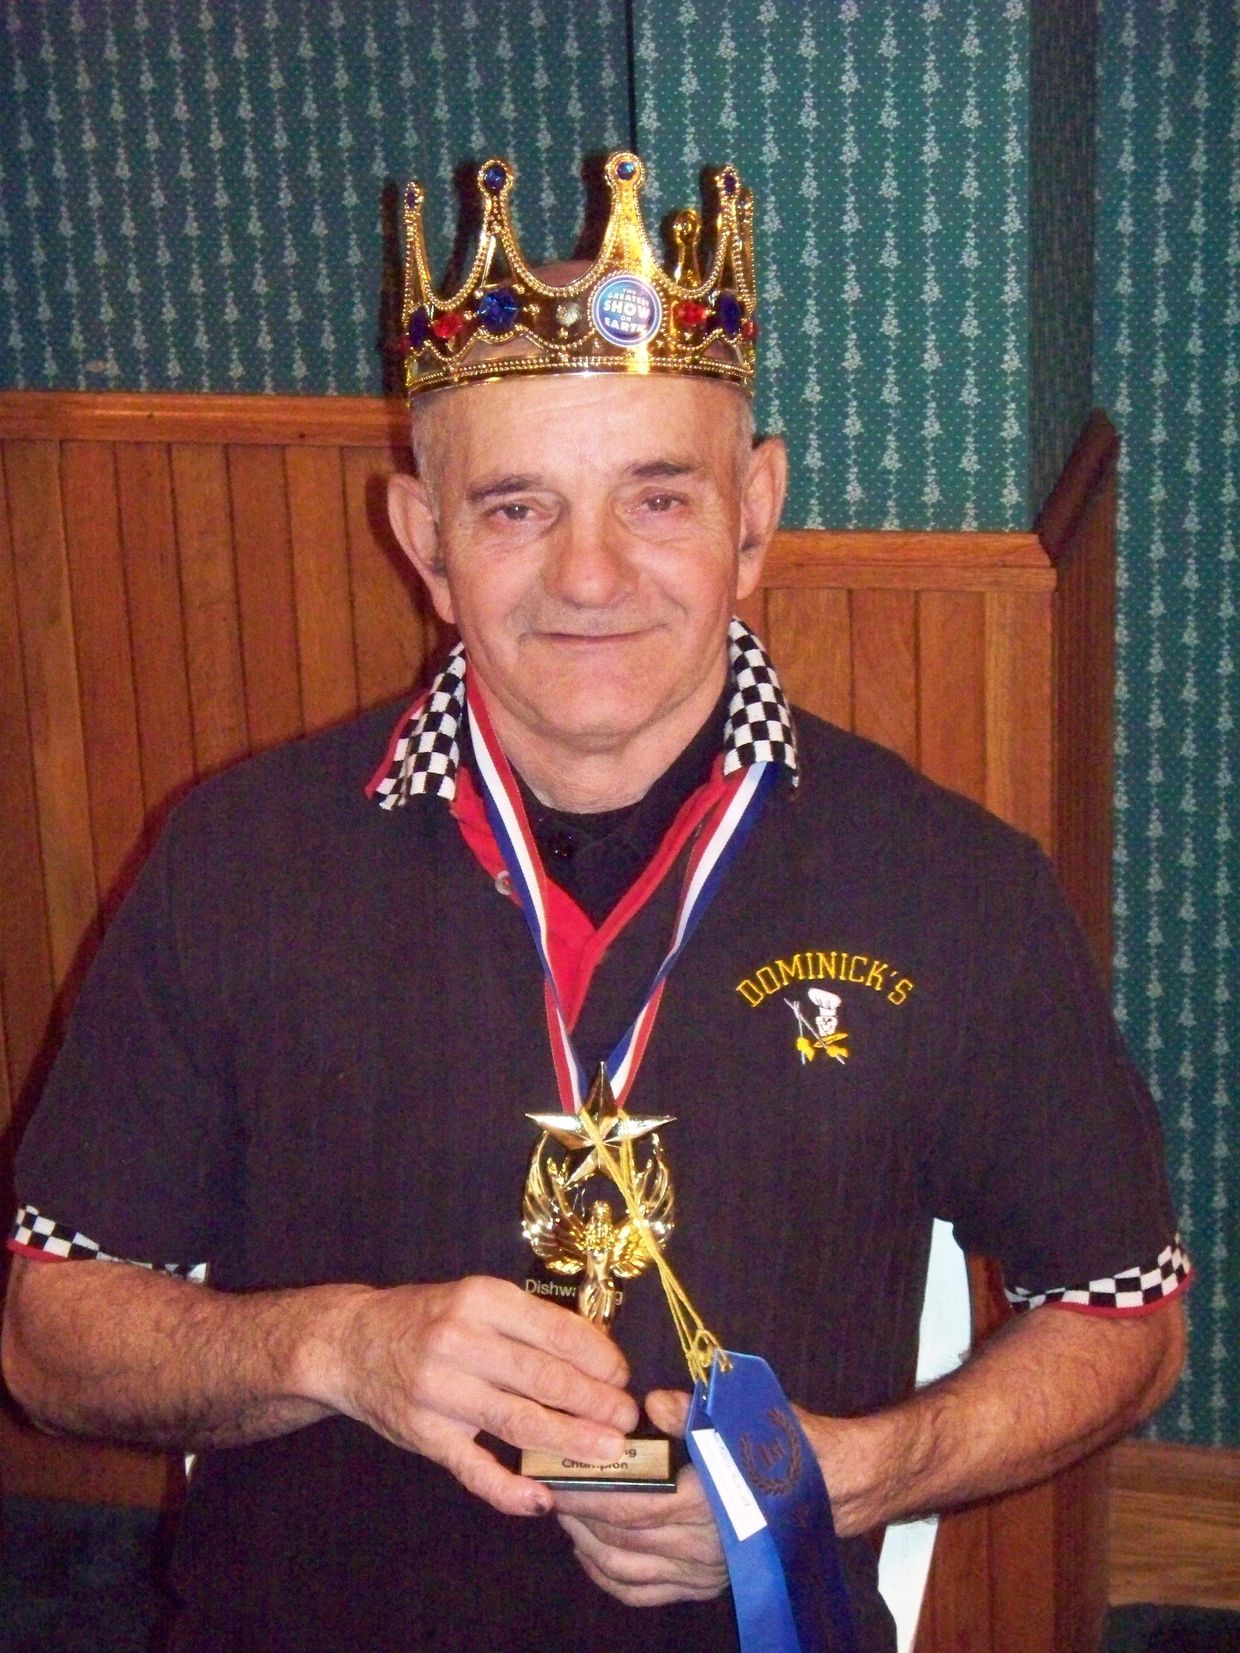 Bob with his Dominick's Shirt, EGC Medals & Trophy - @ Pershun house - Thanksgiving